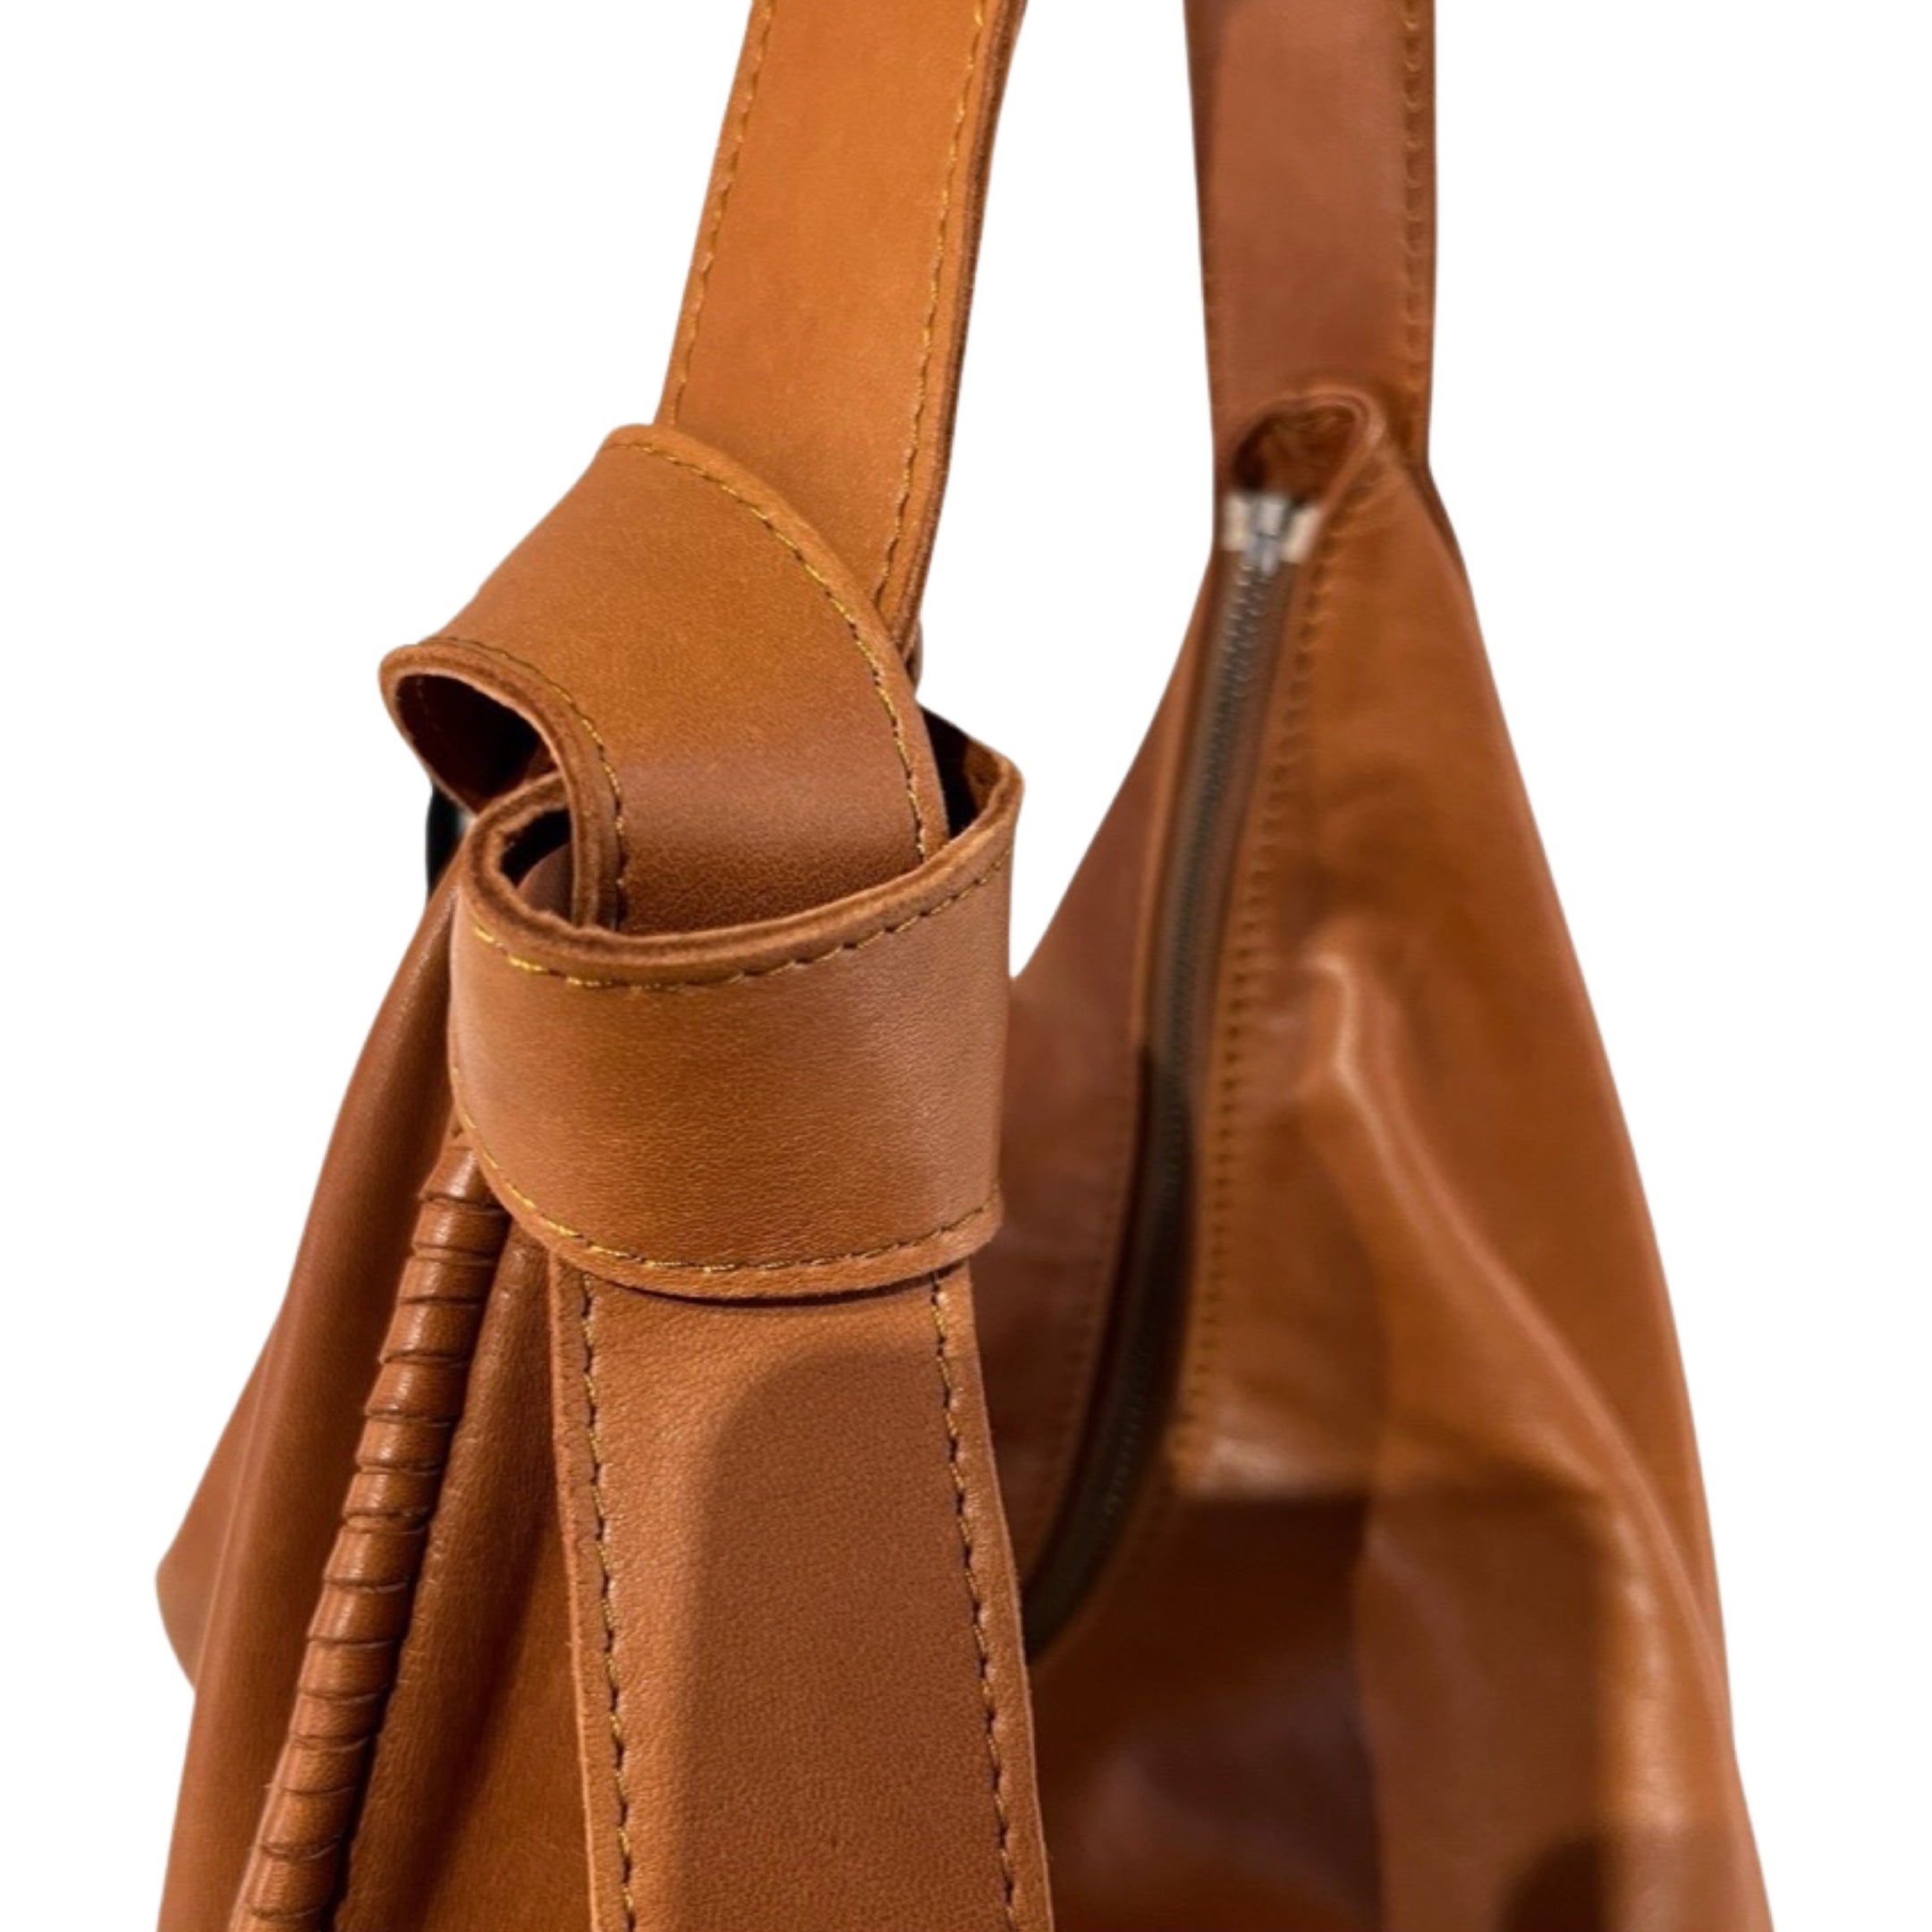 LABEL17 presents the Saddle Bag Ivy in Cognac, made of supple Lamb-Nappaleather